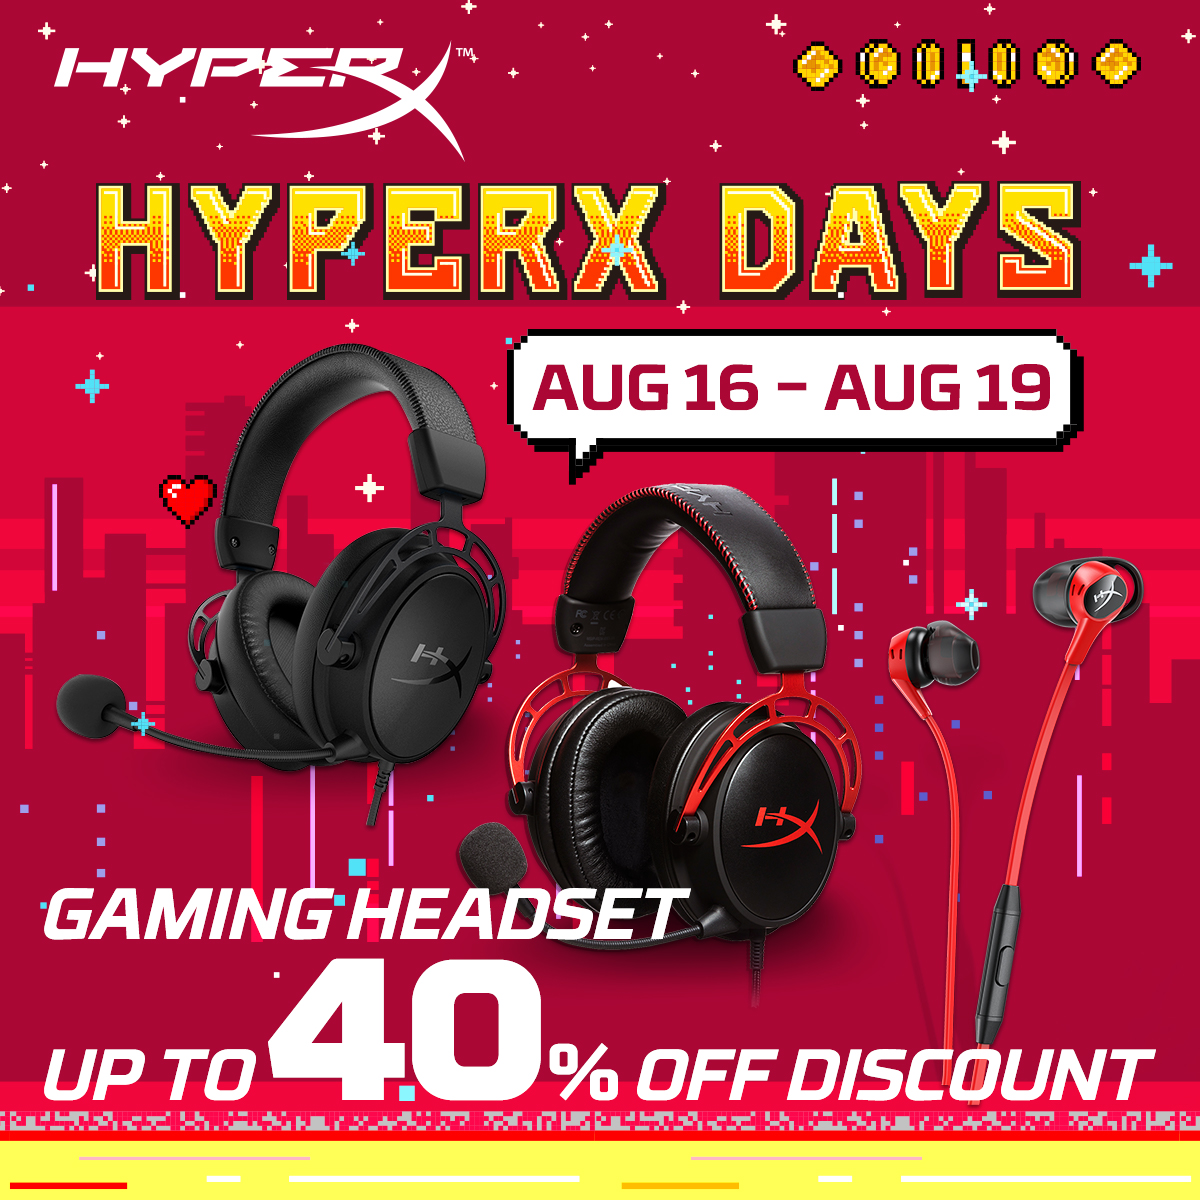 HyperX Days Promotion is Coming! -